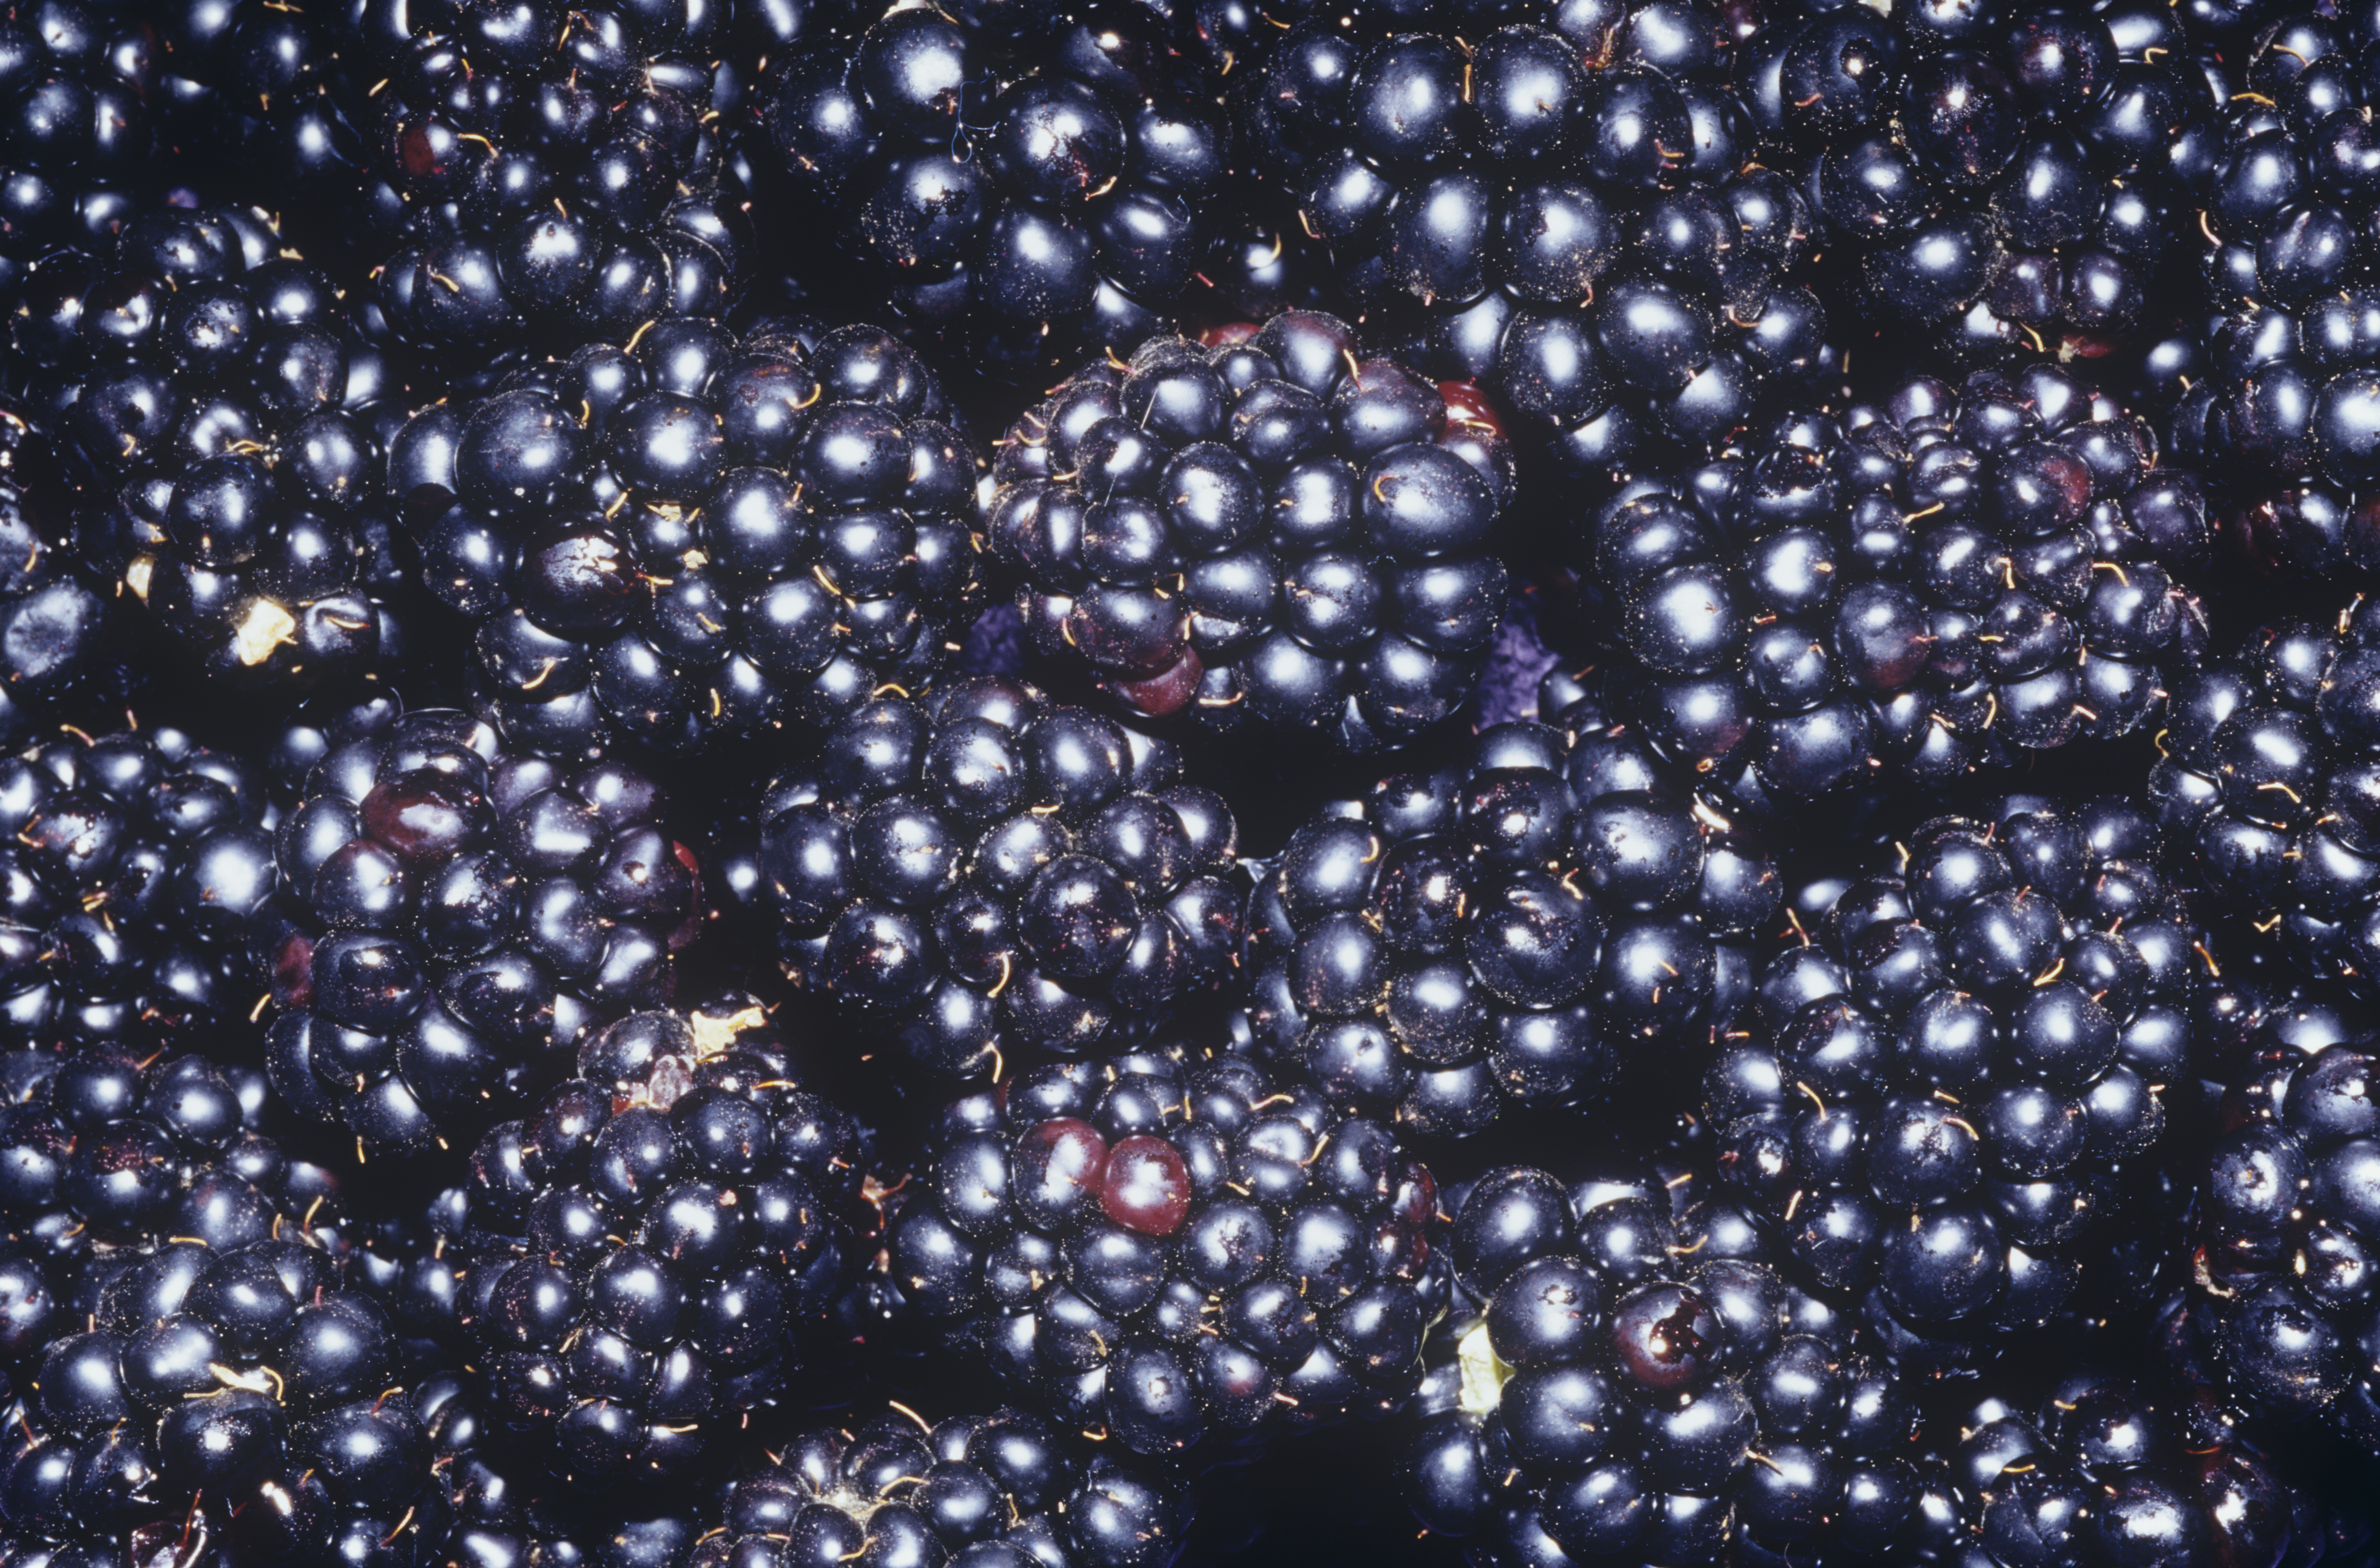 Blackberries: “Blackberries are very prolific in Mexico in April,” says Romano. “They are very big, very plump, they have virtually no tartness to it.